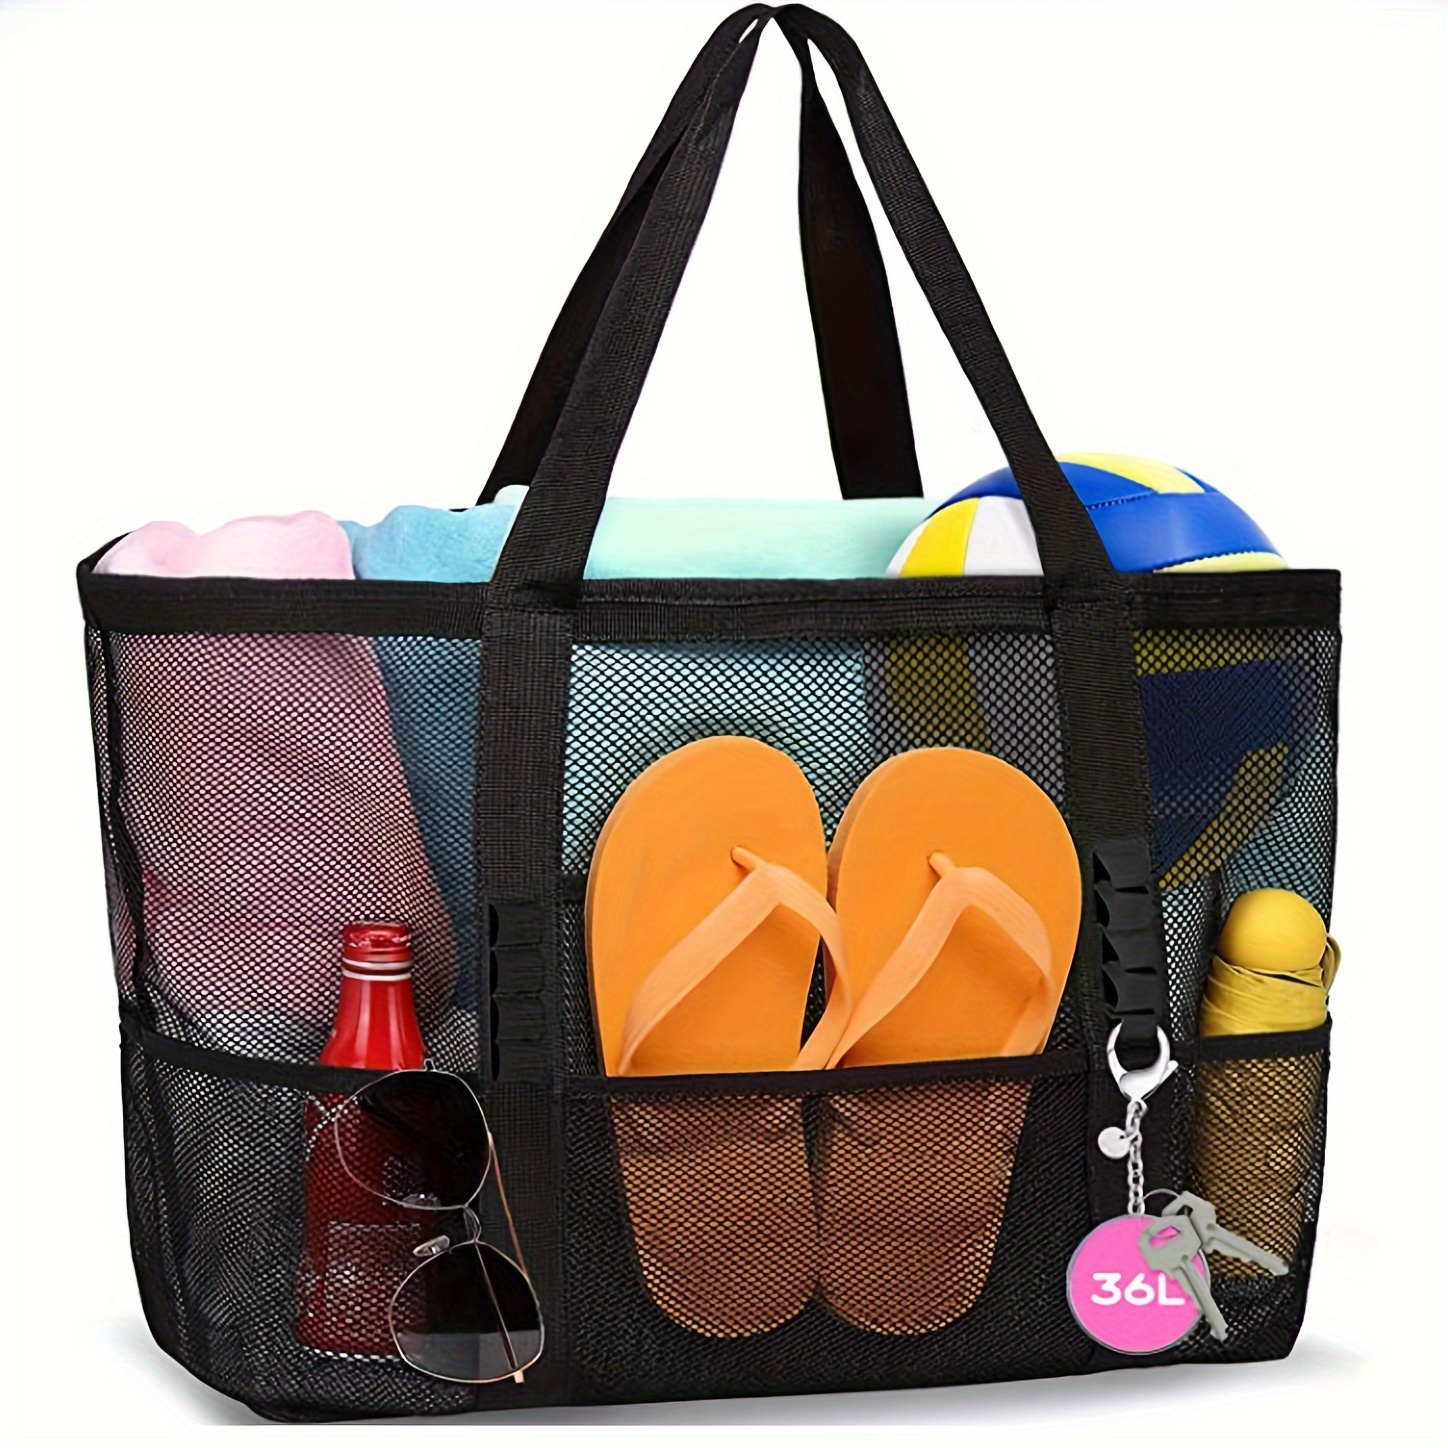 

1pc Large Mesh Beach Bag, Family Foldable Lightweight Pool Bag With Pockets For Vacation Beach Essentials For Holiday Use